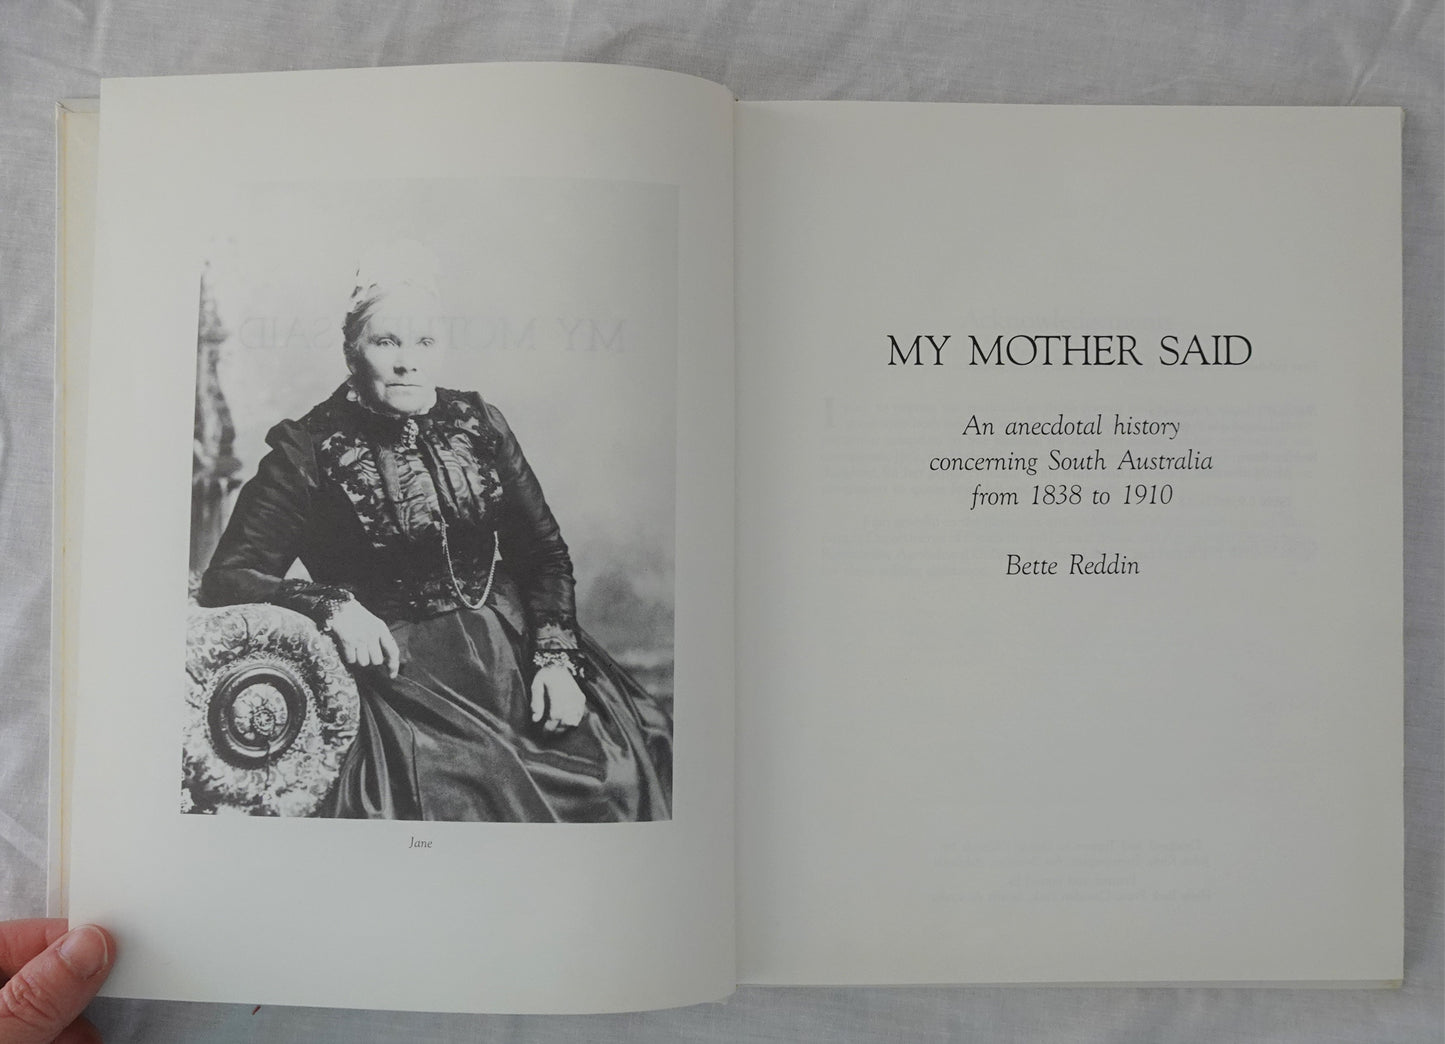 My Mother Said by Bette Reddin